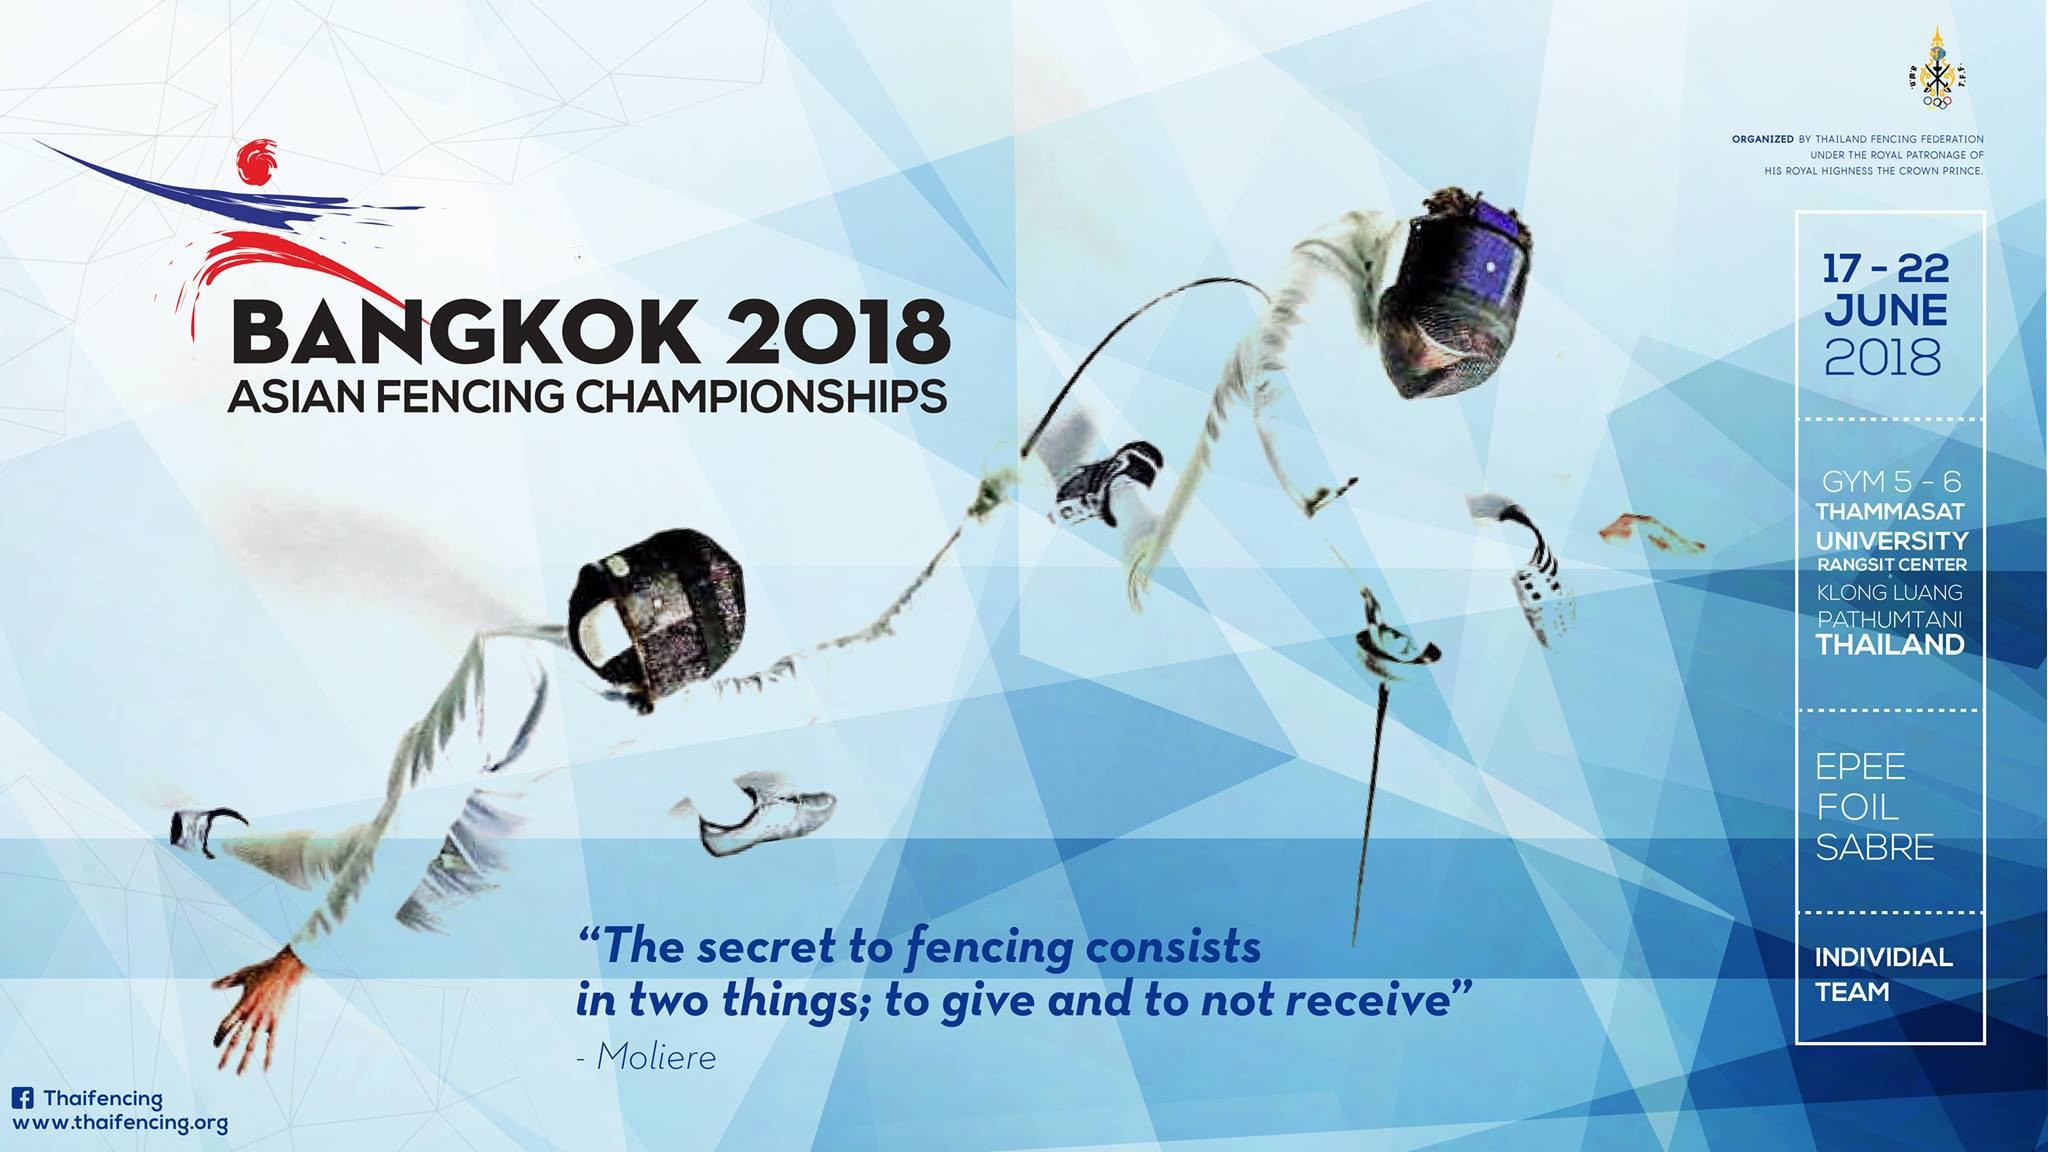 South Korea and China victorious on penultimate day of Asian Fencing Championships in Bangkok